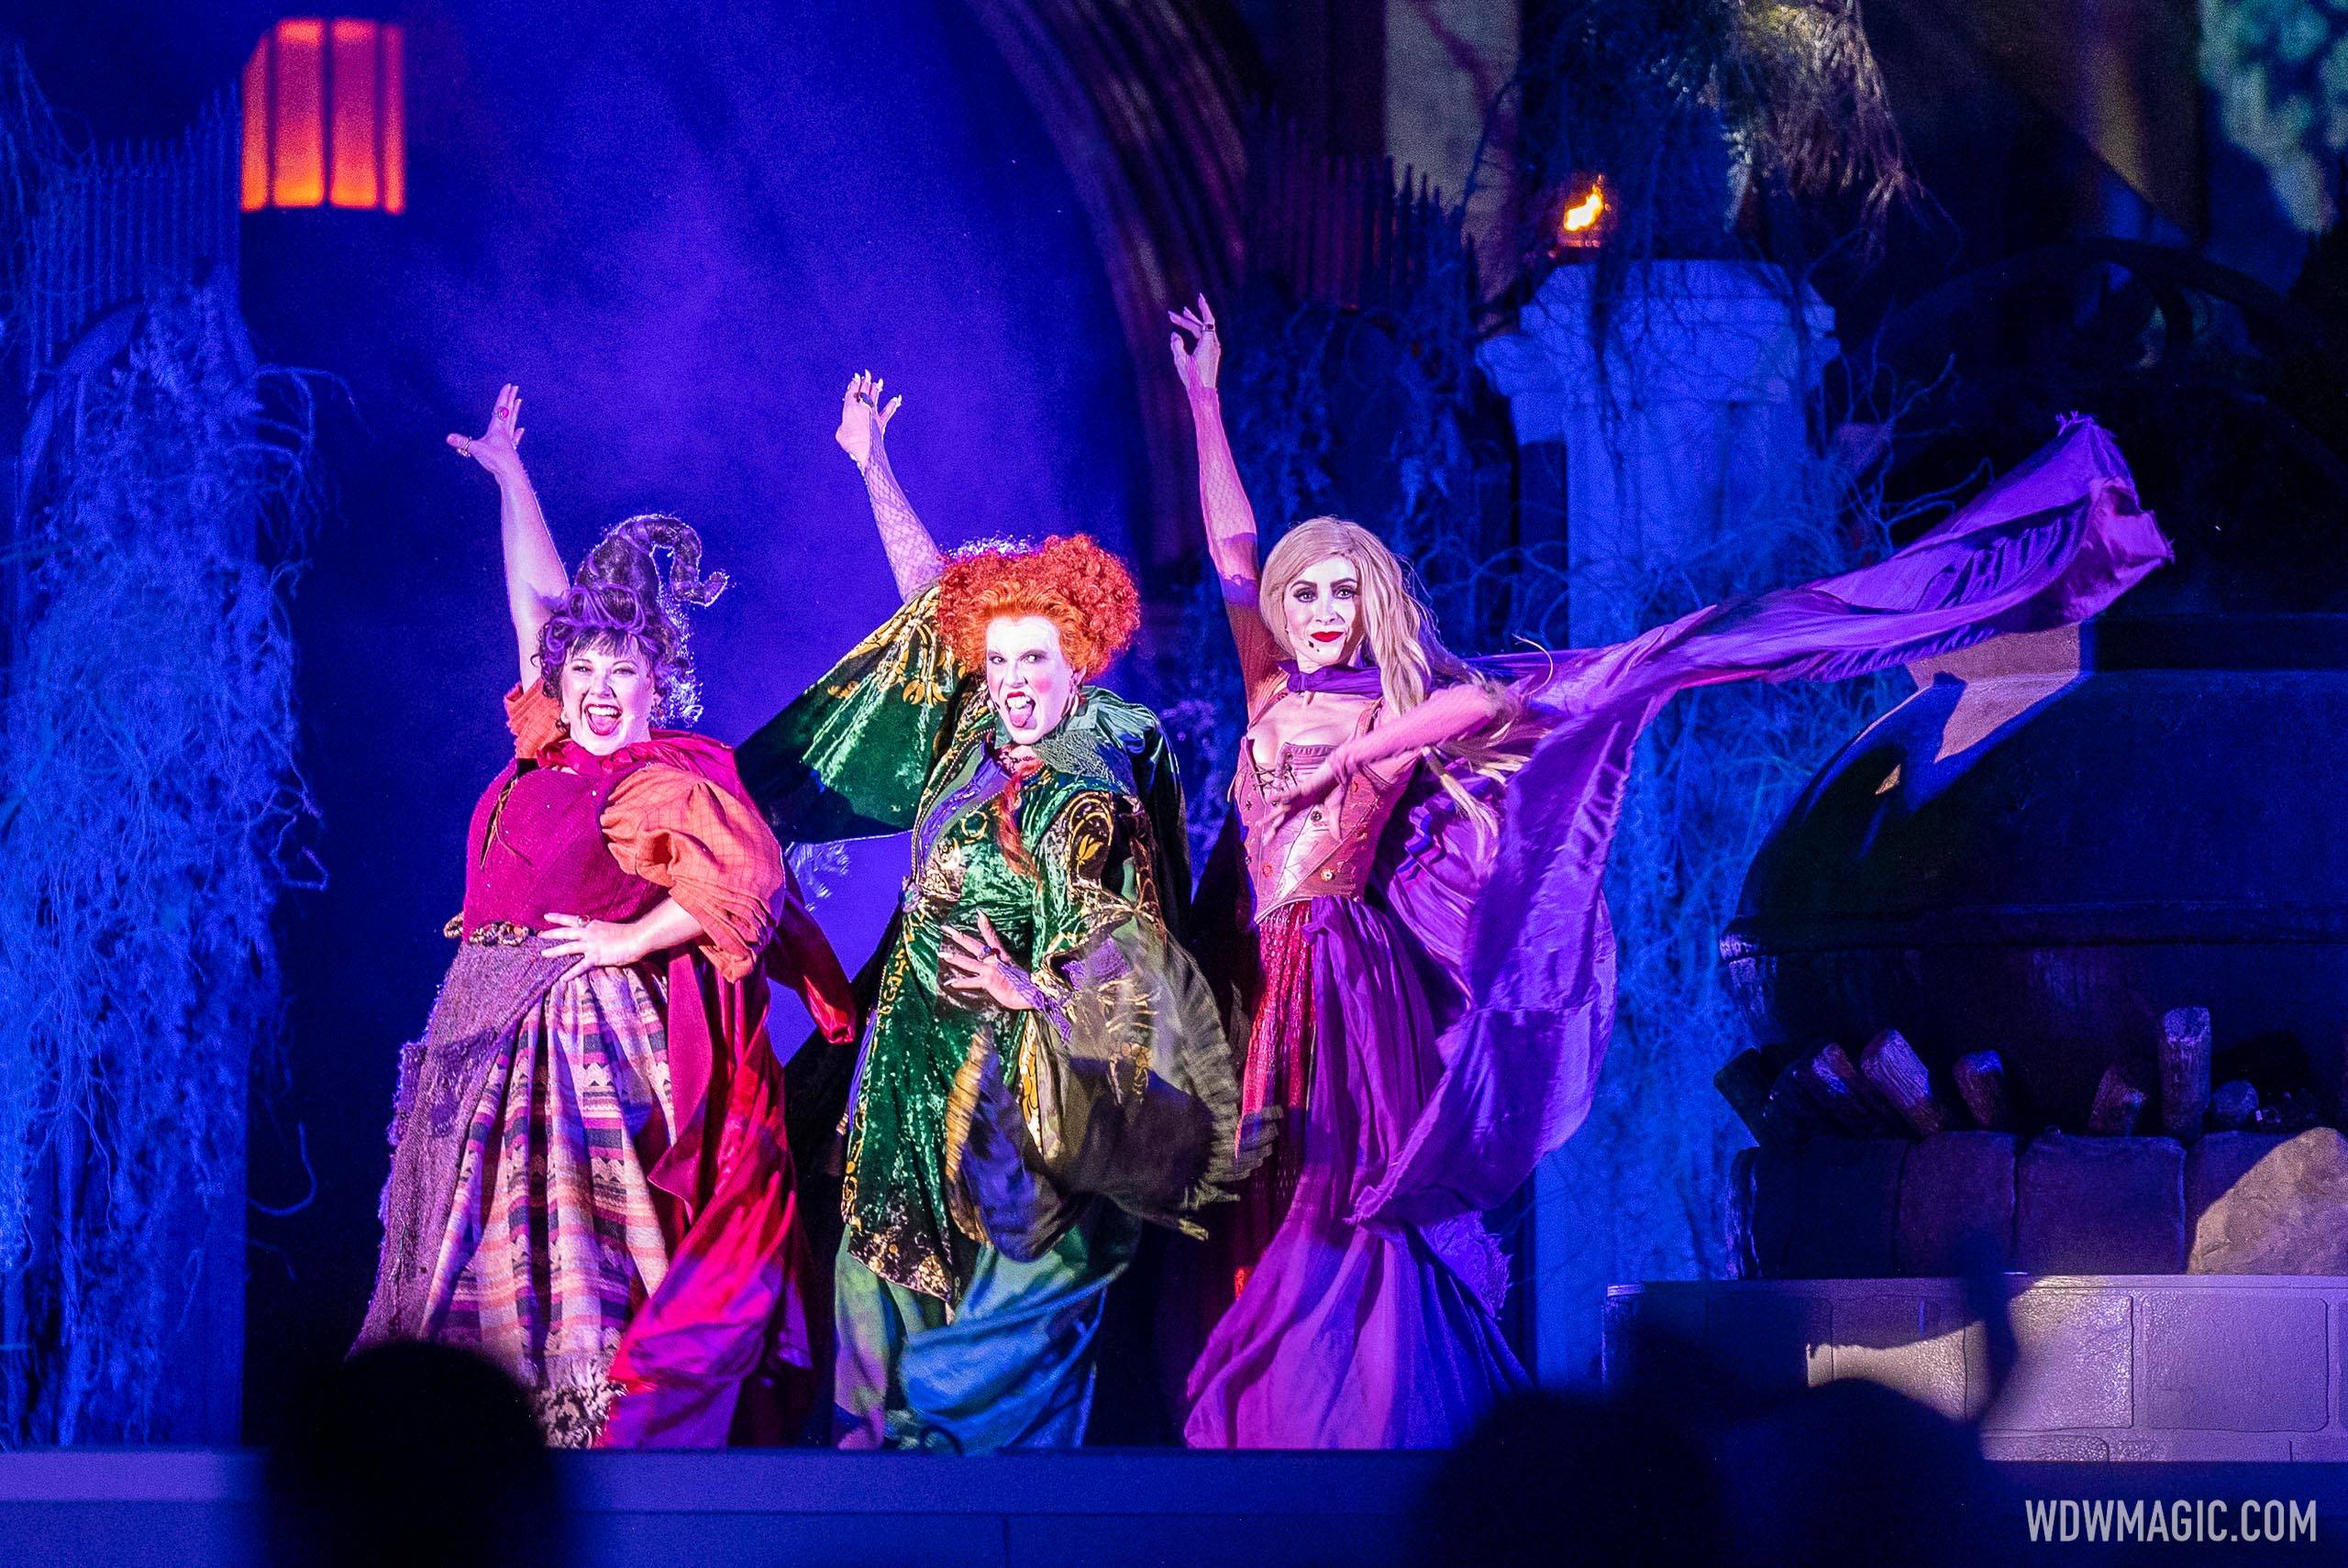 The Witches are back! Hocus Pocus Villain Spelltacular returns to Magic Kingdom as part of Mickey's Not-So-Scary Halloween Party